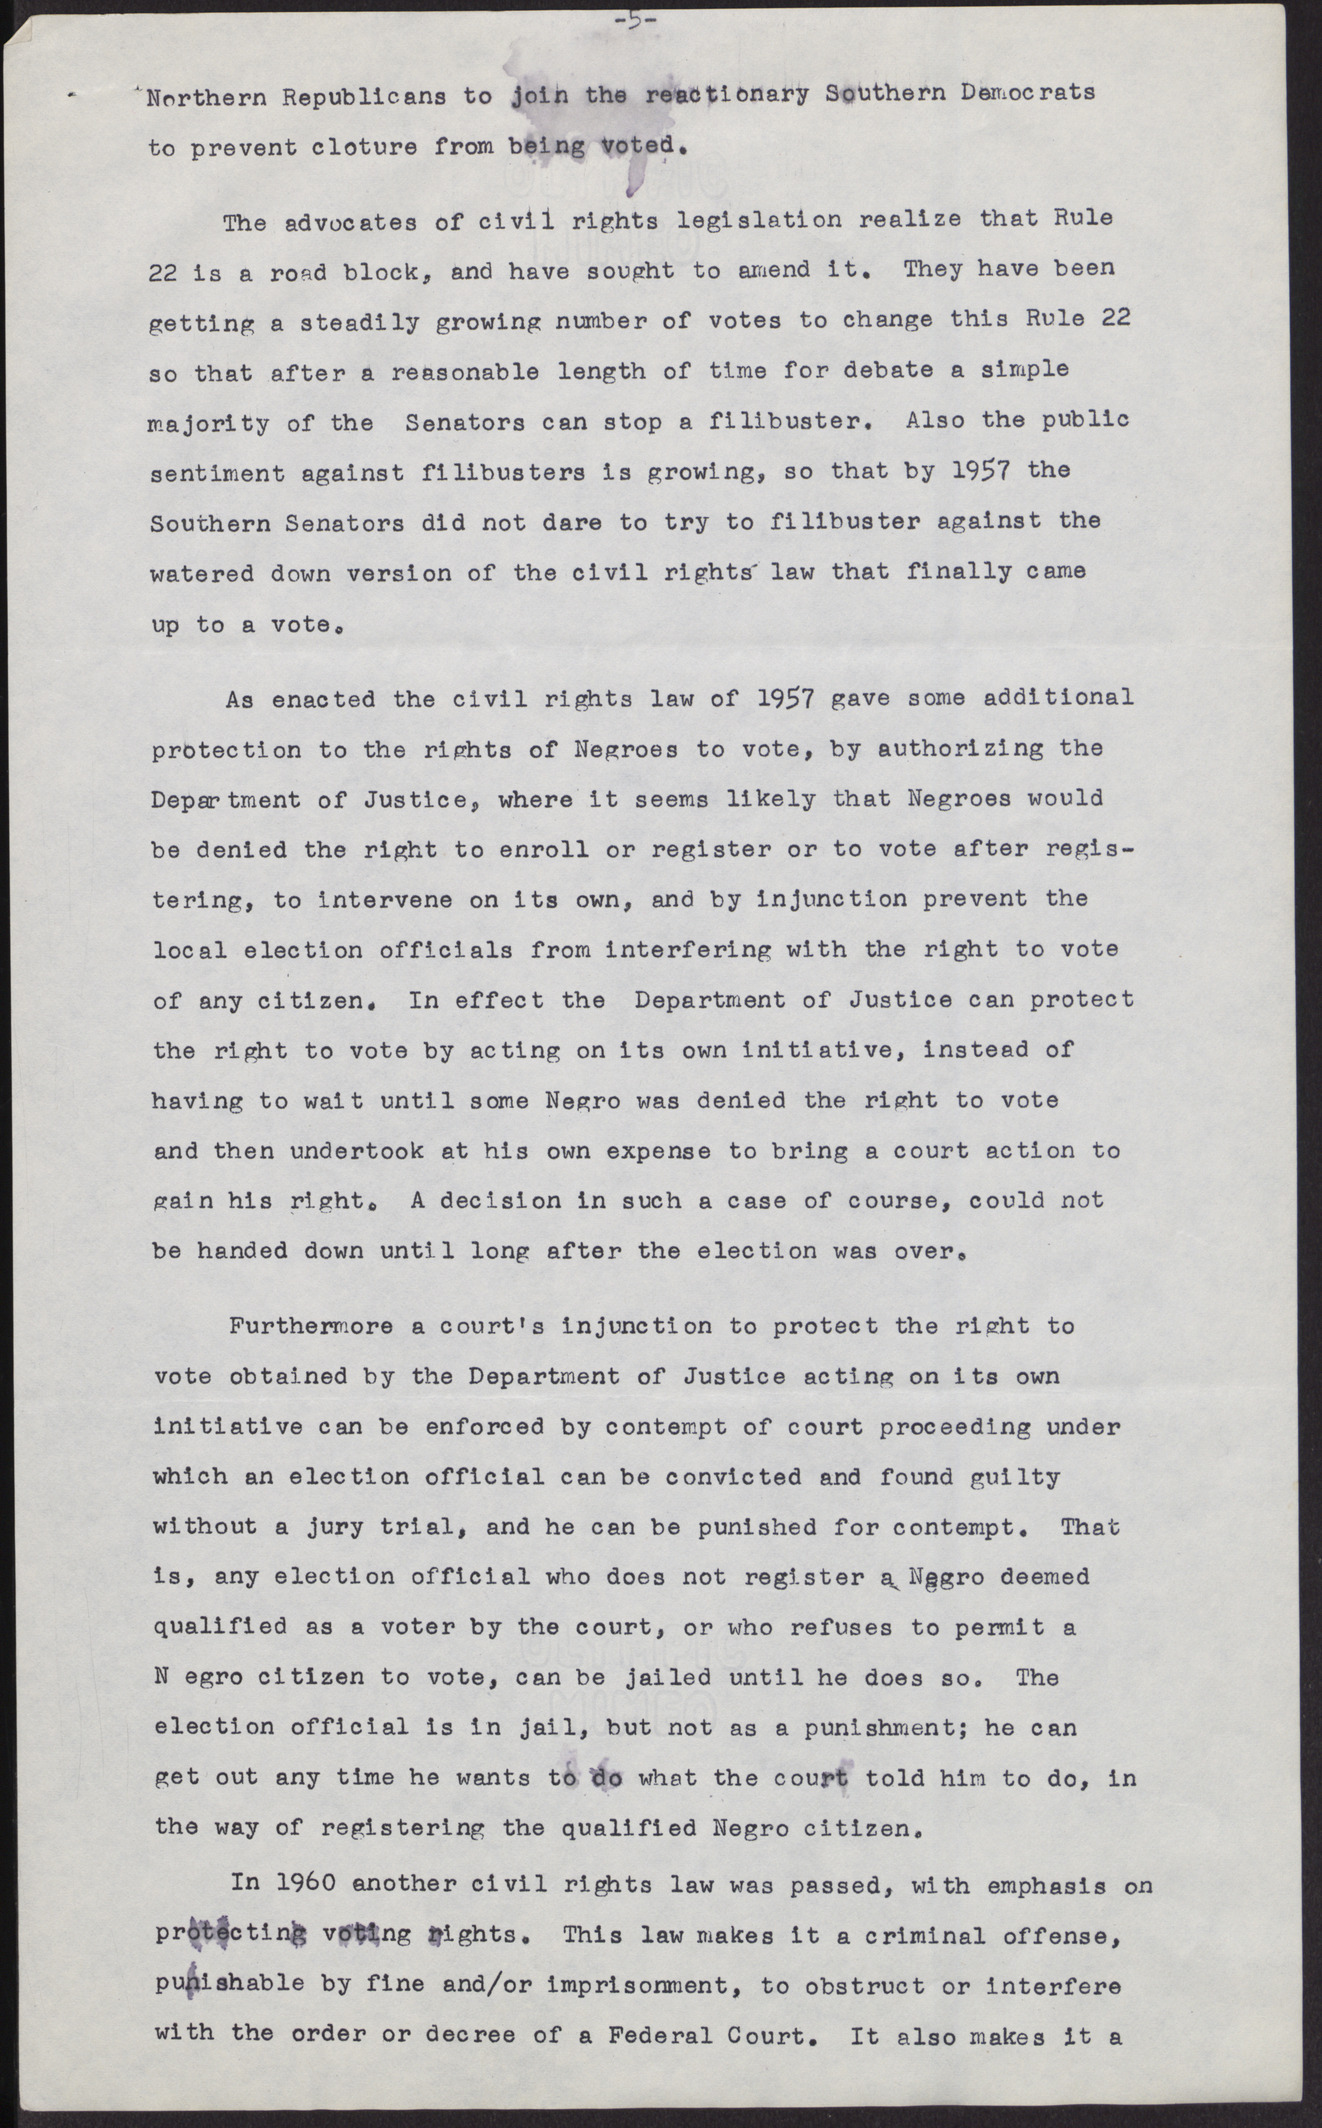 Speakers' notes: The NAACP and the Fight for Desegregation, page 5